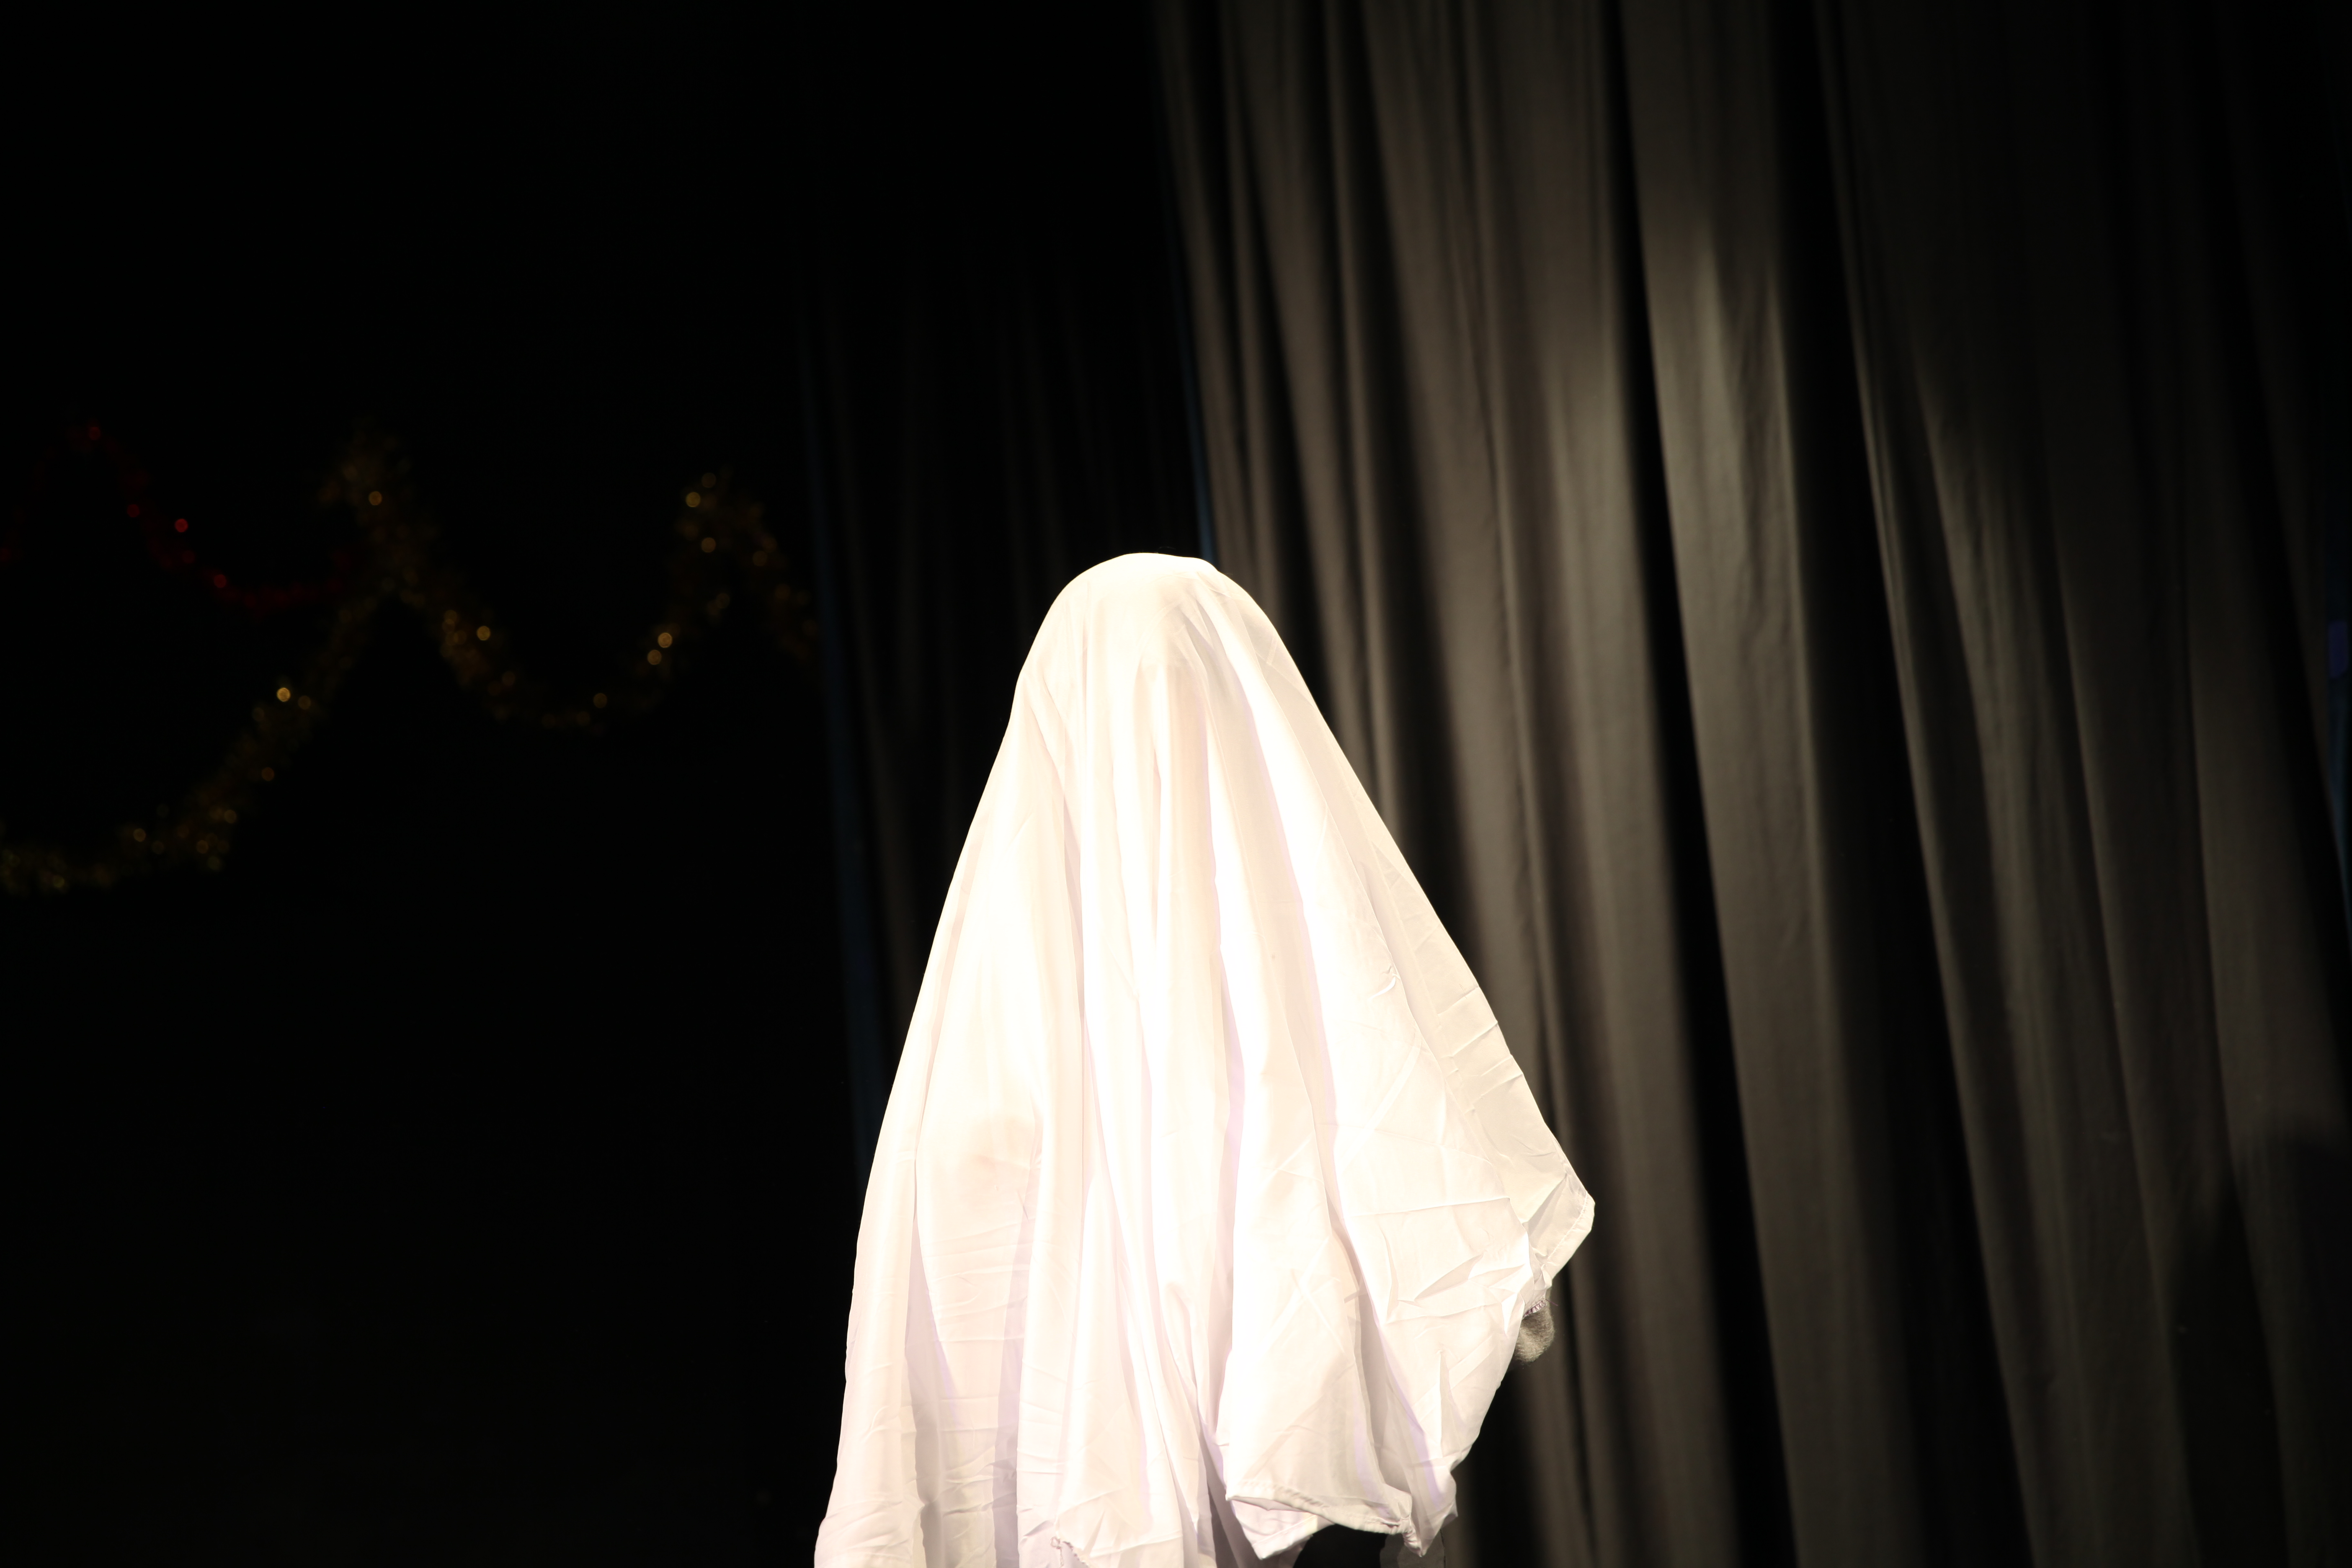 An actor wearing a white sheet, like a ghost, stands on stage.